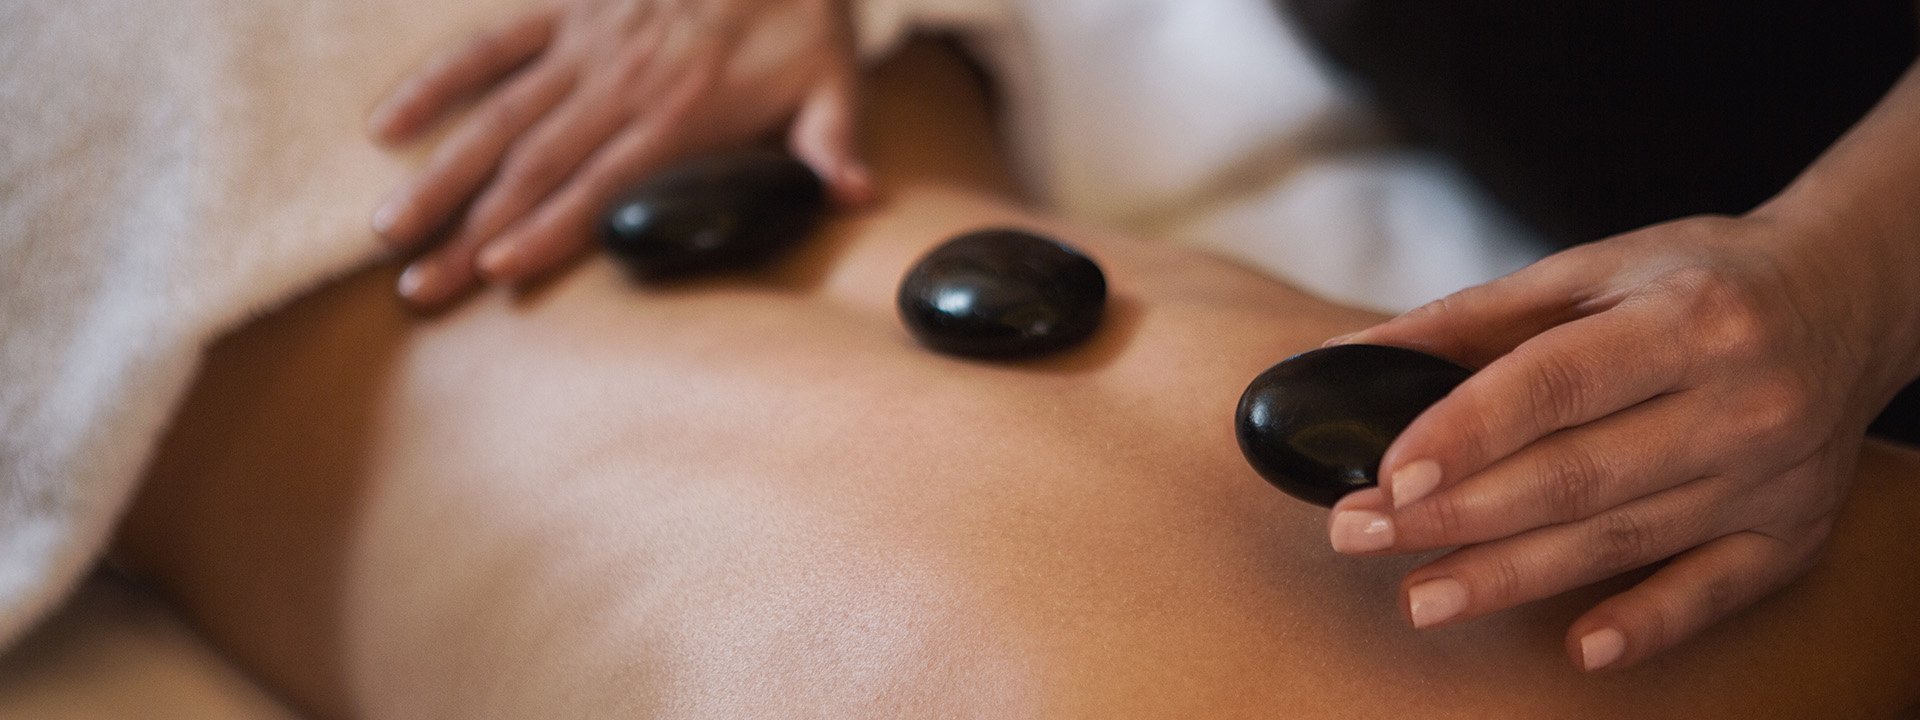 Three hot stones being placed on a woman's back during a spa treatment.